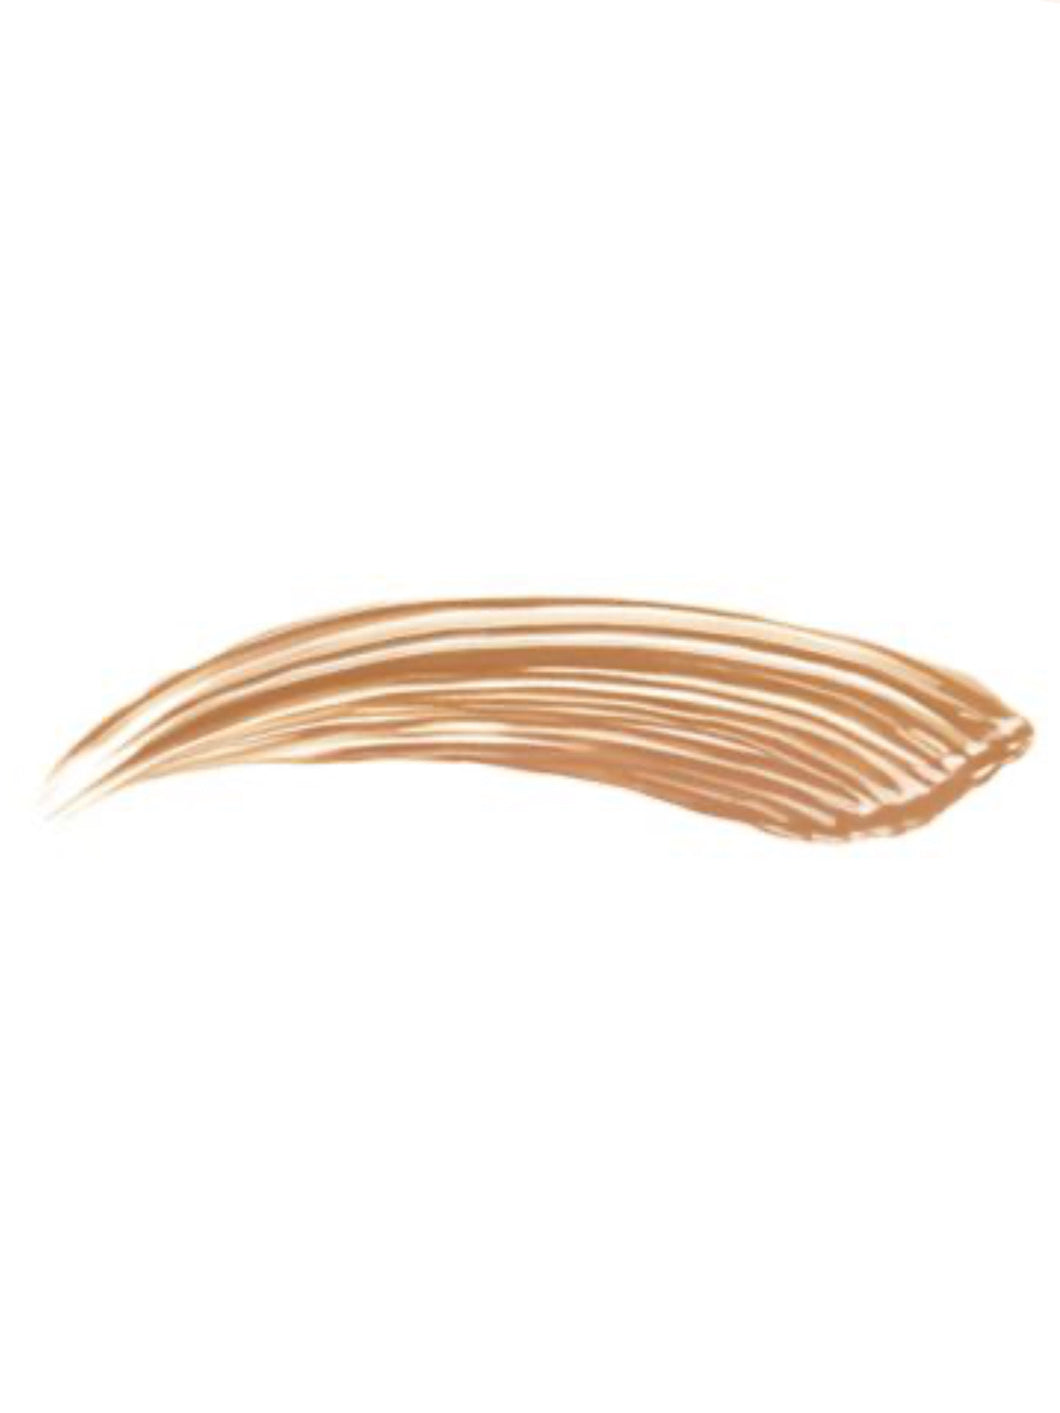 Bare Minerals: Strength & Length Serum-Infused Brow Gel - The Vogue Boutique